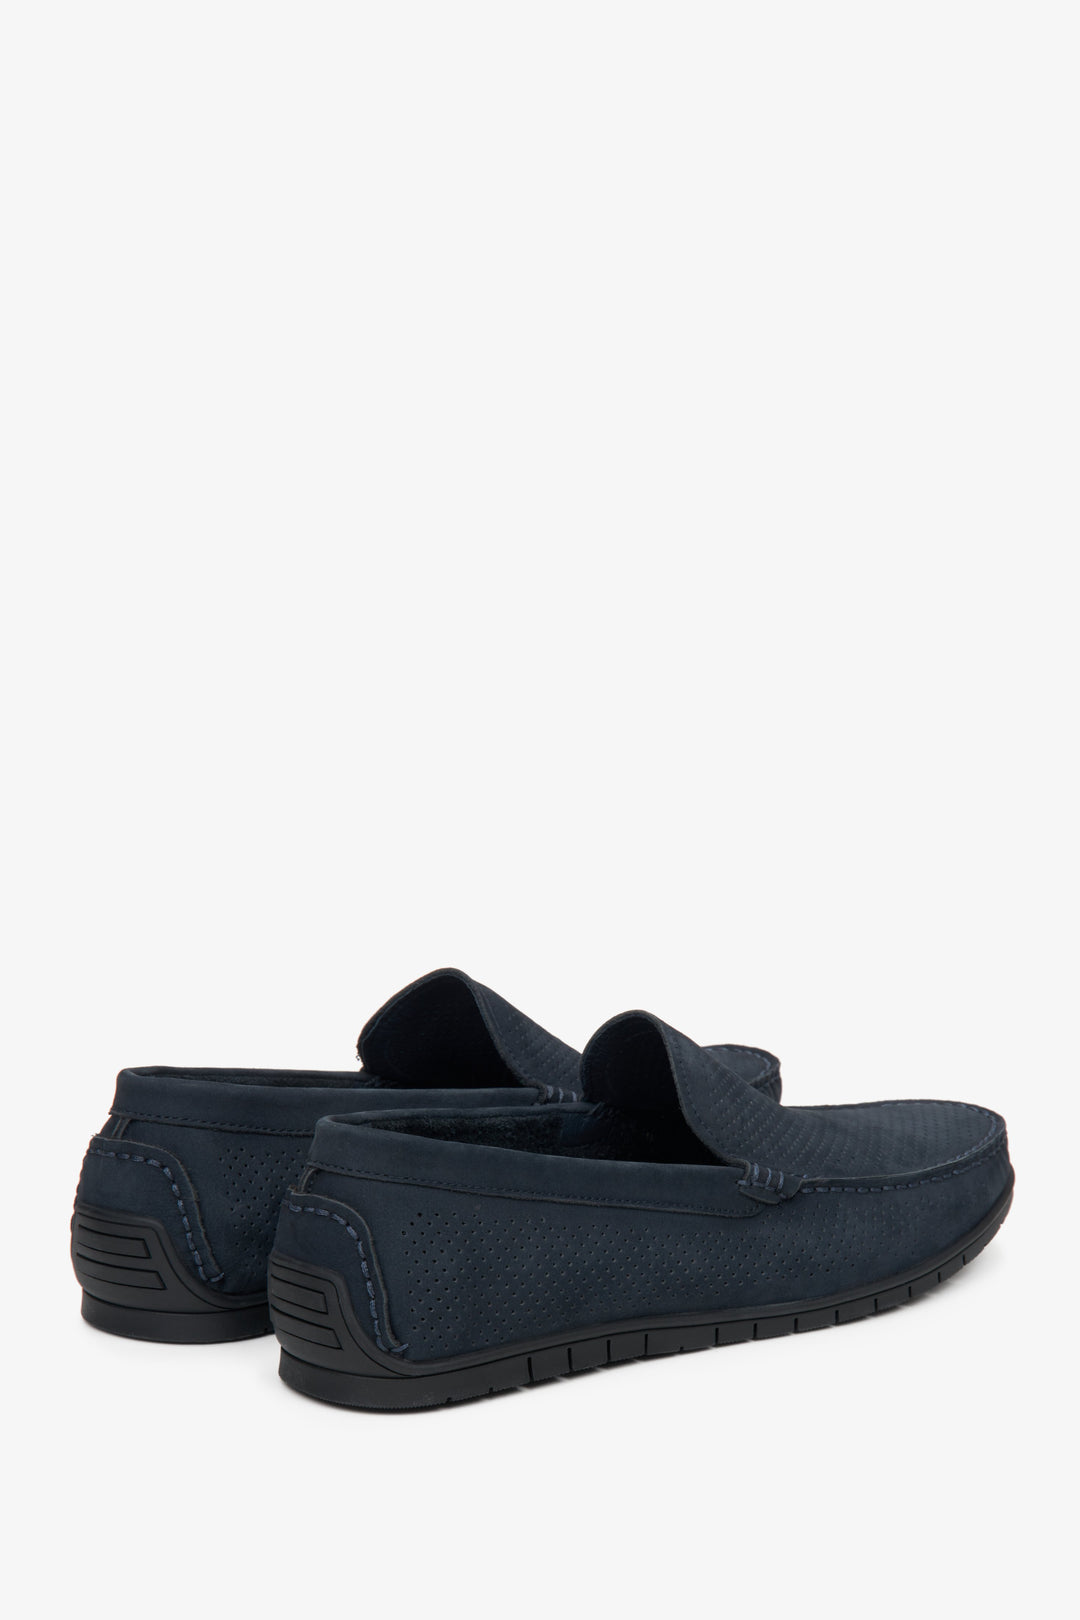 Men's navy blue loafers with perforation - close-up on the heel and side seam of the shoes.